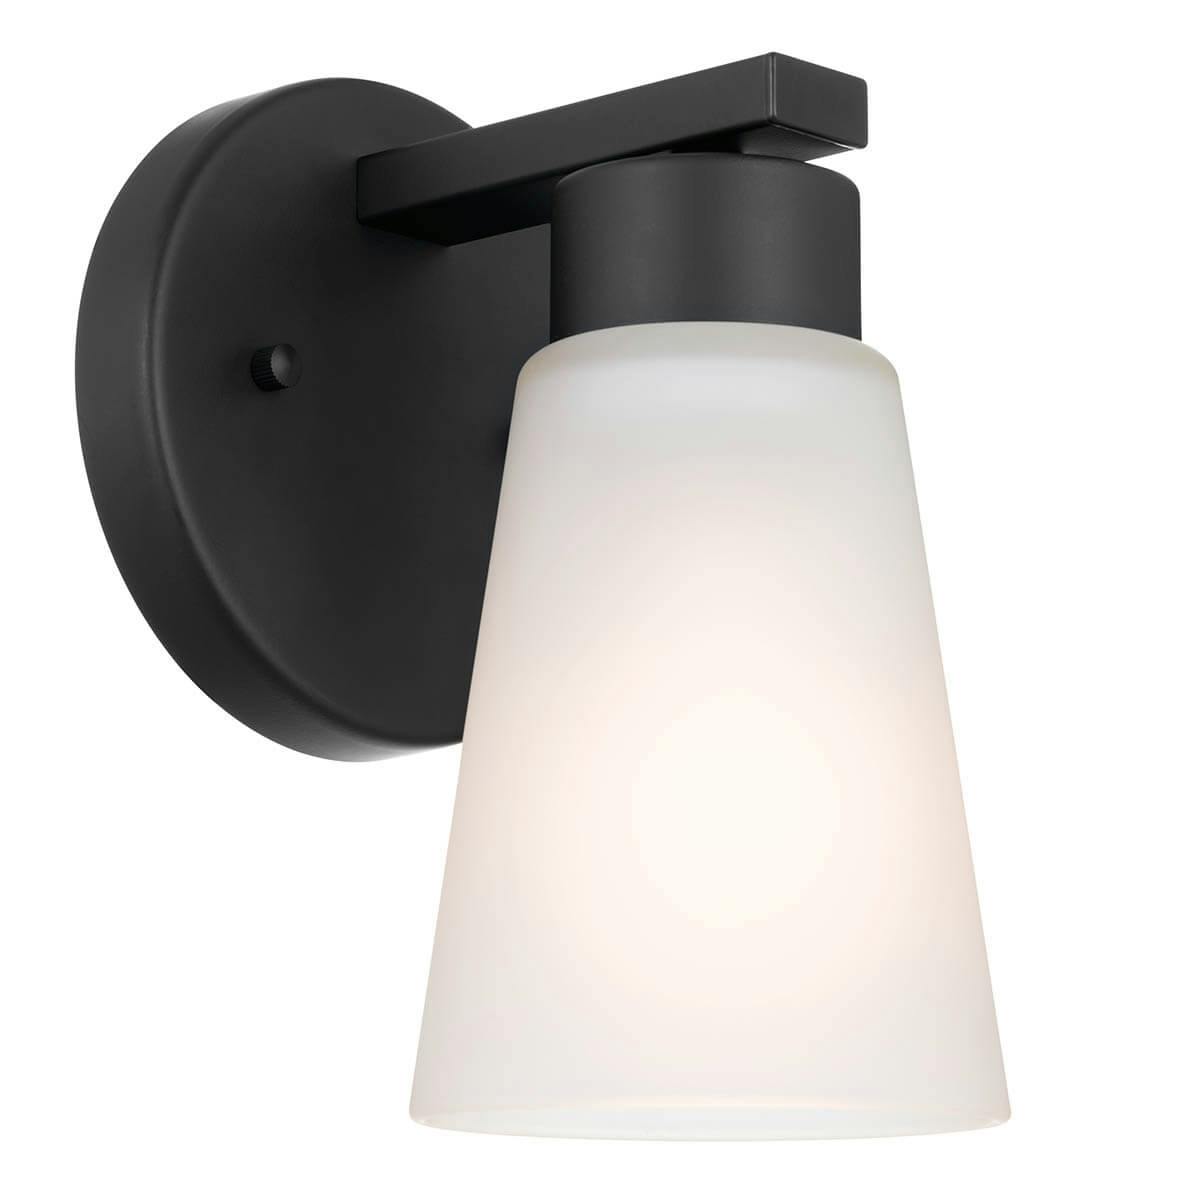 Stamos 4.25" 1 Light Wall Sconce Black on a white background